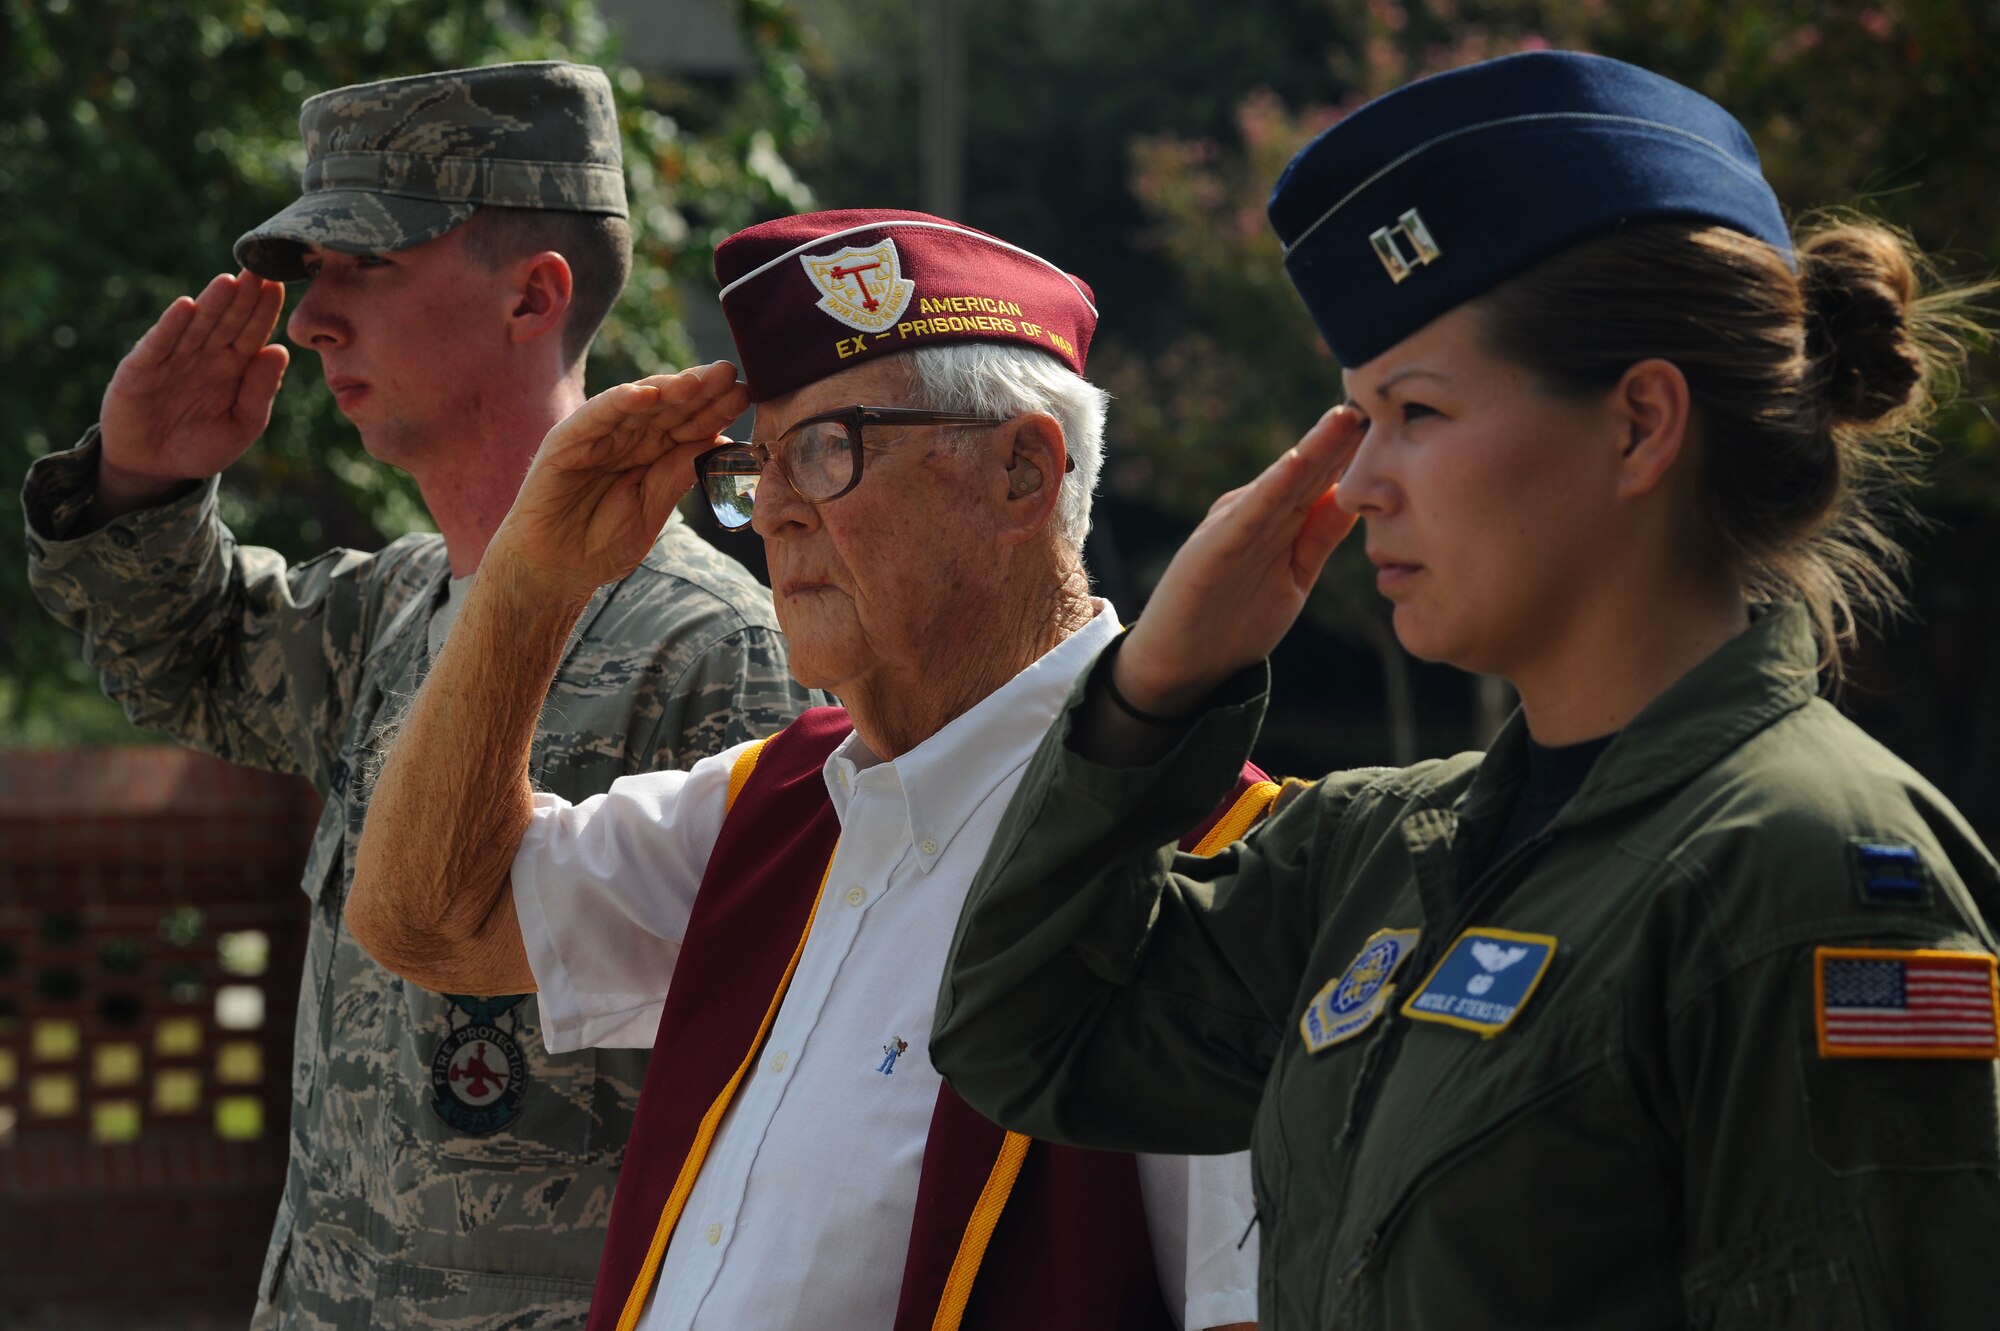 Senior Airman Samuel Siewert, Lt. Col. (Ret.) Ernest Jenkins and Capt. Nicole Stenstad render salutes as the national anthem is played and the flag is lowered during a Prisoner of War/Missing in Action retreat ceremony on Joint Base Charleston, S.C., Sept. 17, 2010. The retreat commenced after the end of a 24-hour, joint-service run, which kept military service flags and the POW/MIA flag in constant motion. Colonel Jenkins, a former POW, was detained in Bath, Germany, during World War II after his B-17 was shot down. He was imprisoned for 17 months. Colonel Jenkins was a bombardier on the B-17 "Stardust," Airman Siewert is a driver operator with the 628th Civil Engineer Squadron and Capt. Stenstad is a C-17 pilot with the 14th Airlift Squadron. (U.S. Air Force photo/Airman 1st Class Lauren Main)